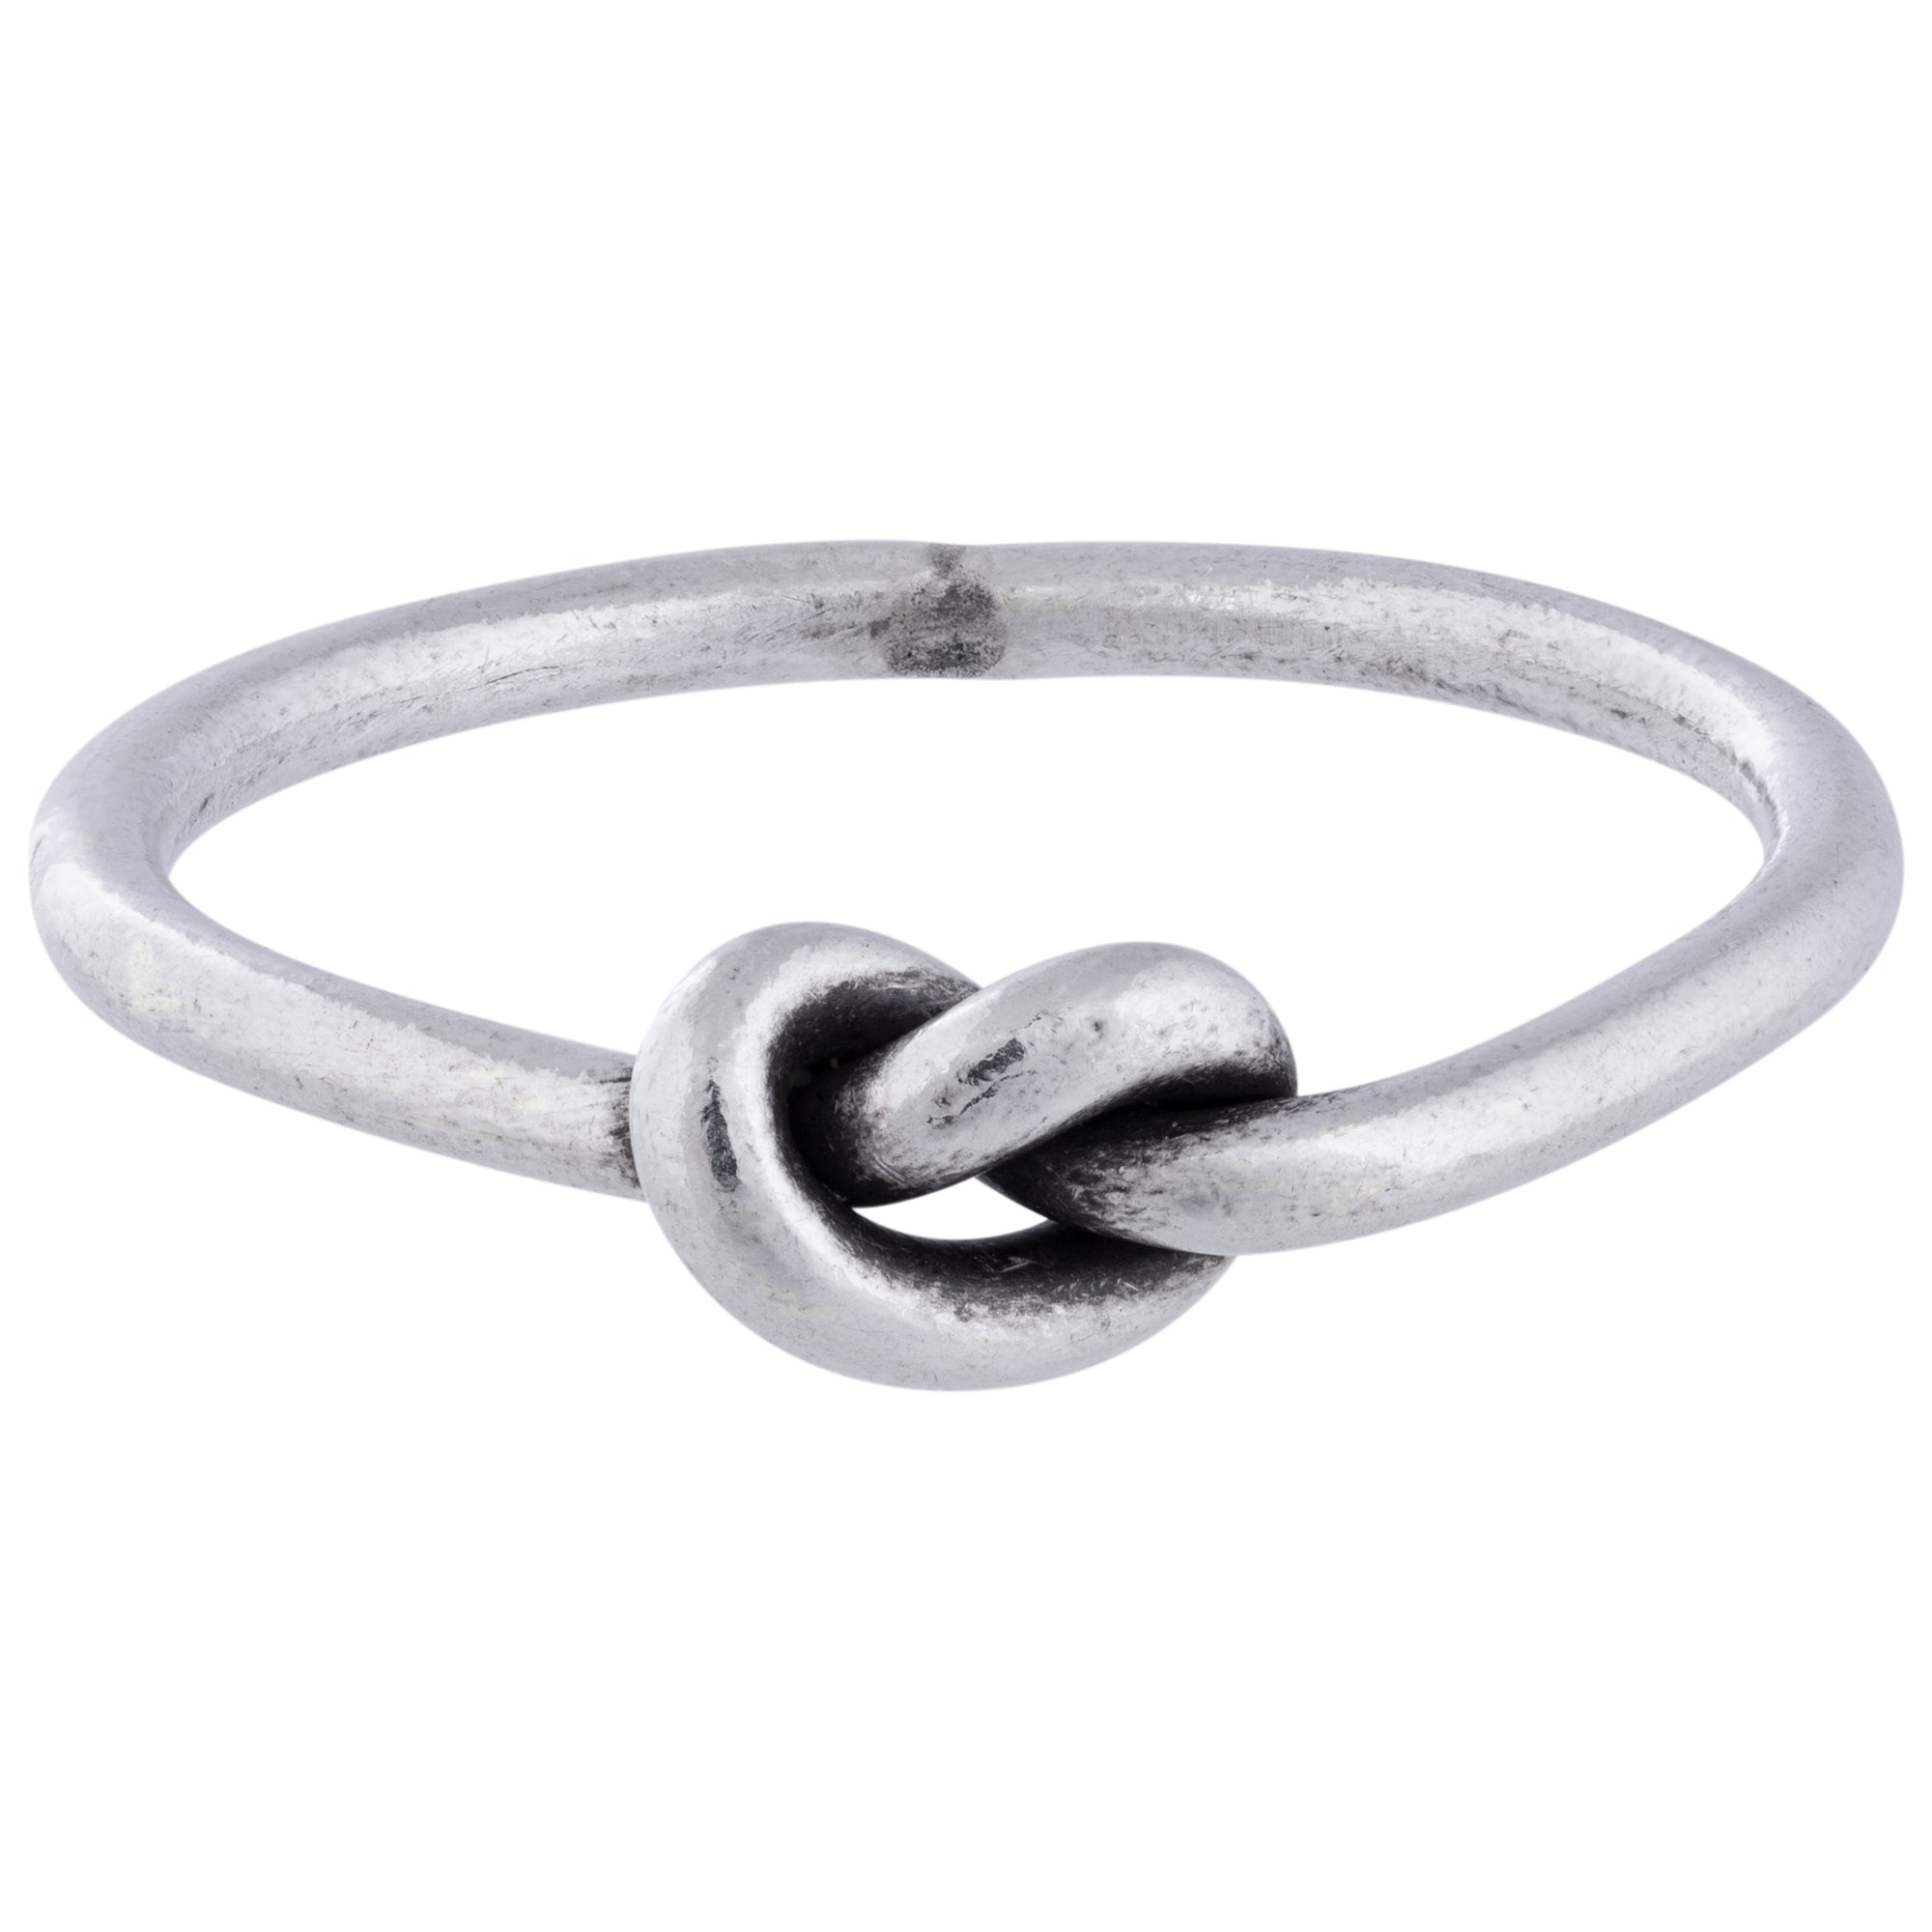 Tiny Knot Sterling Silver Ring - Size 7